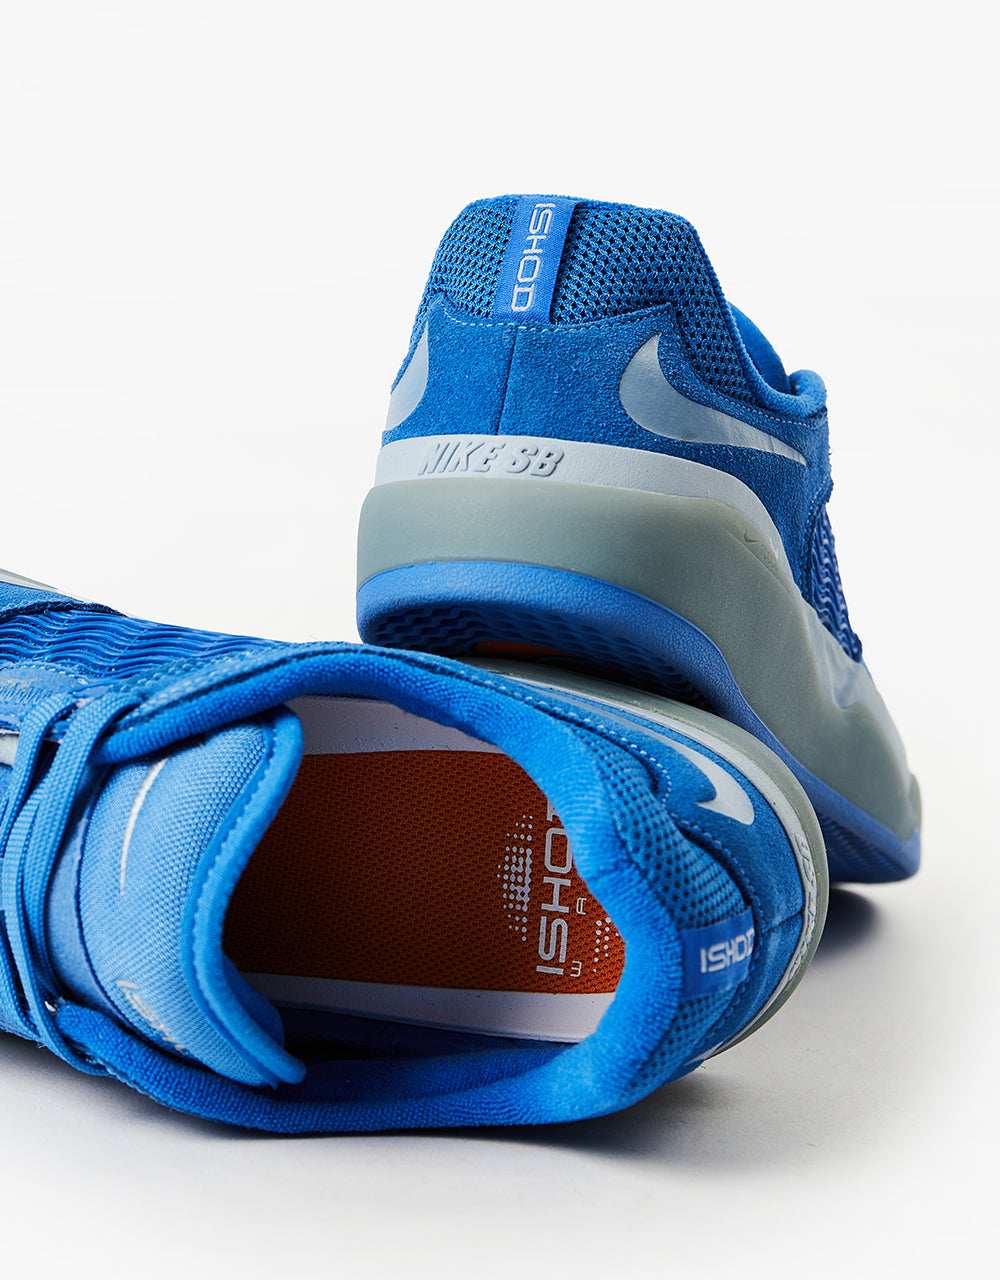 Nike SB Ishod Skate Shoes - Pacific Blue/Boarder Blue-Navy